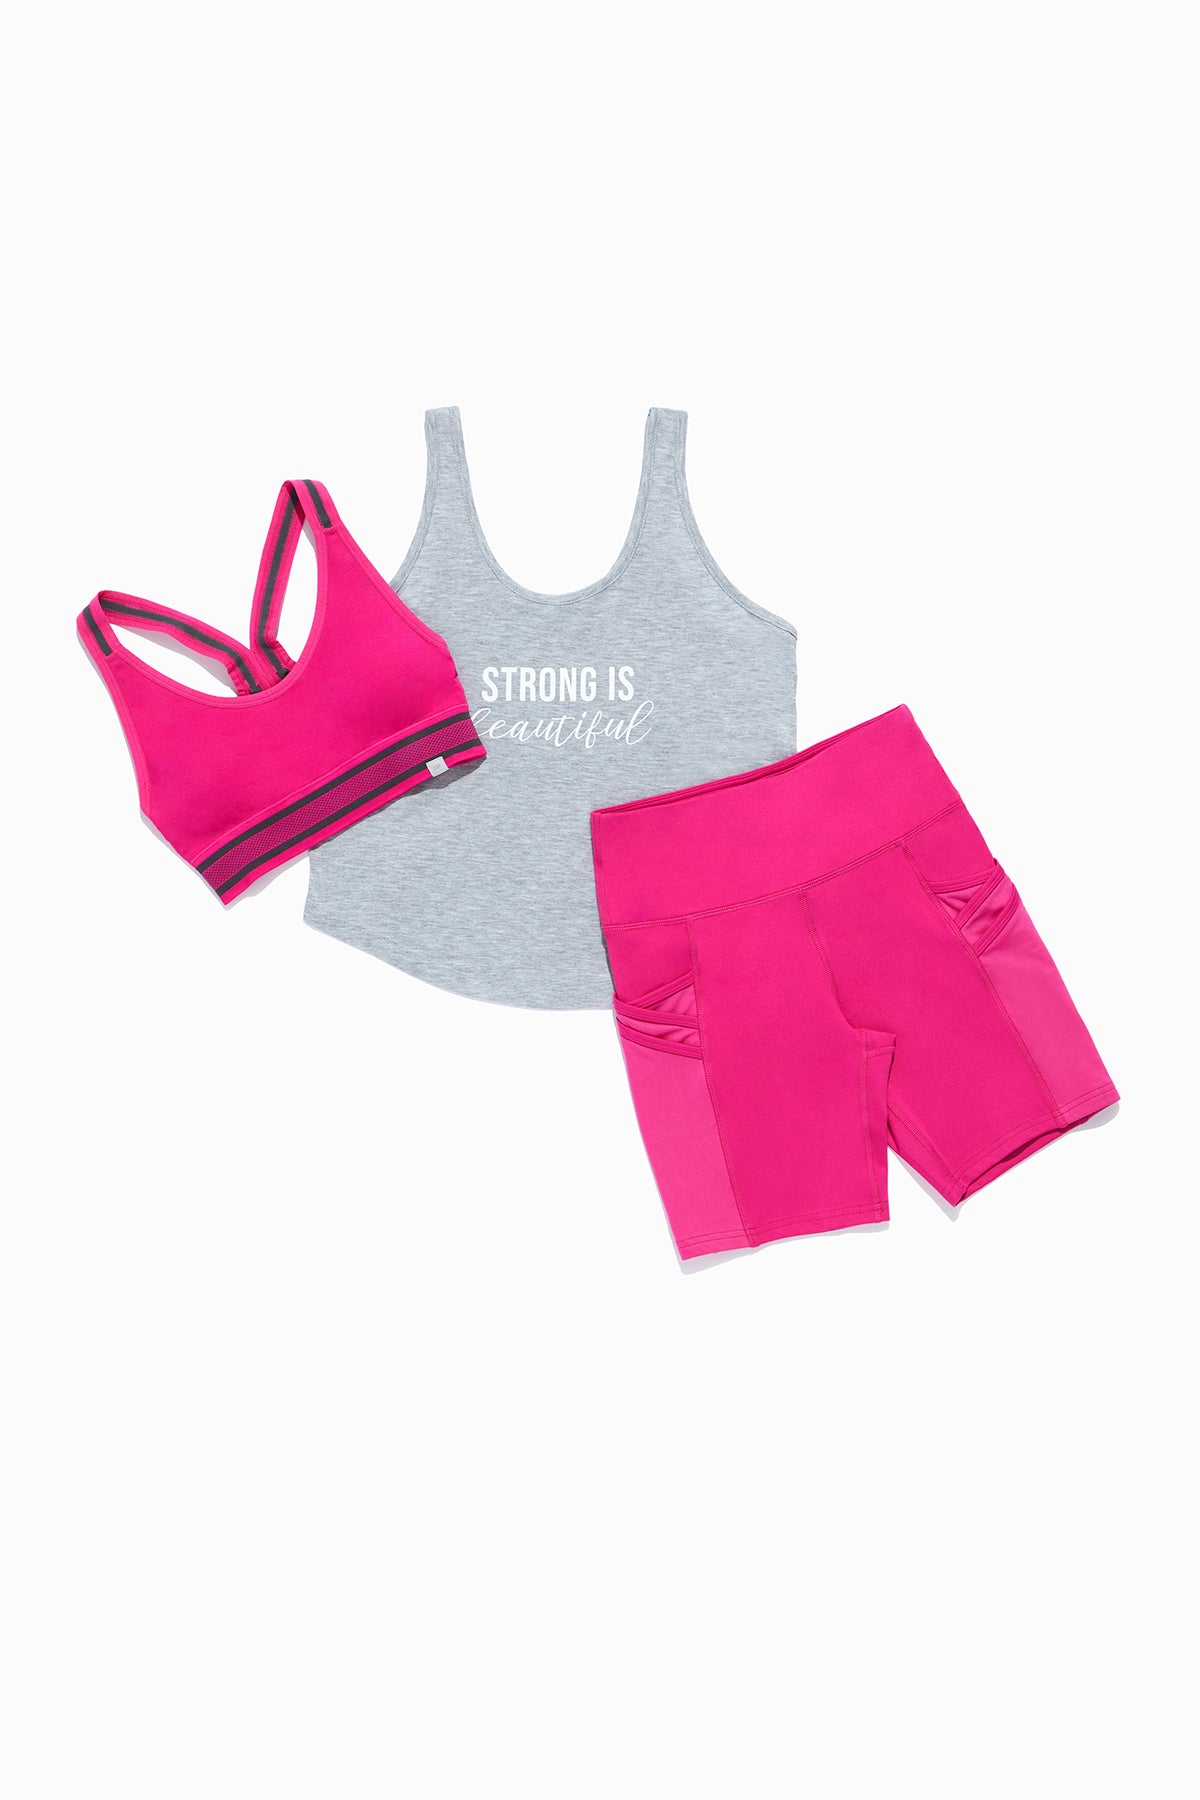 Pink Is Power - 3 Items